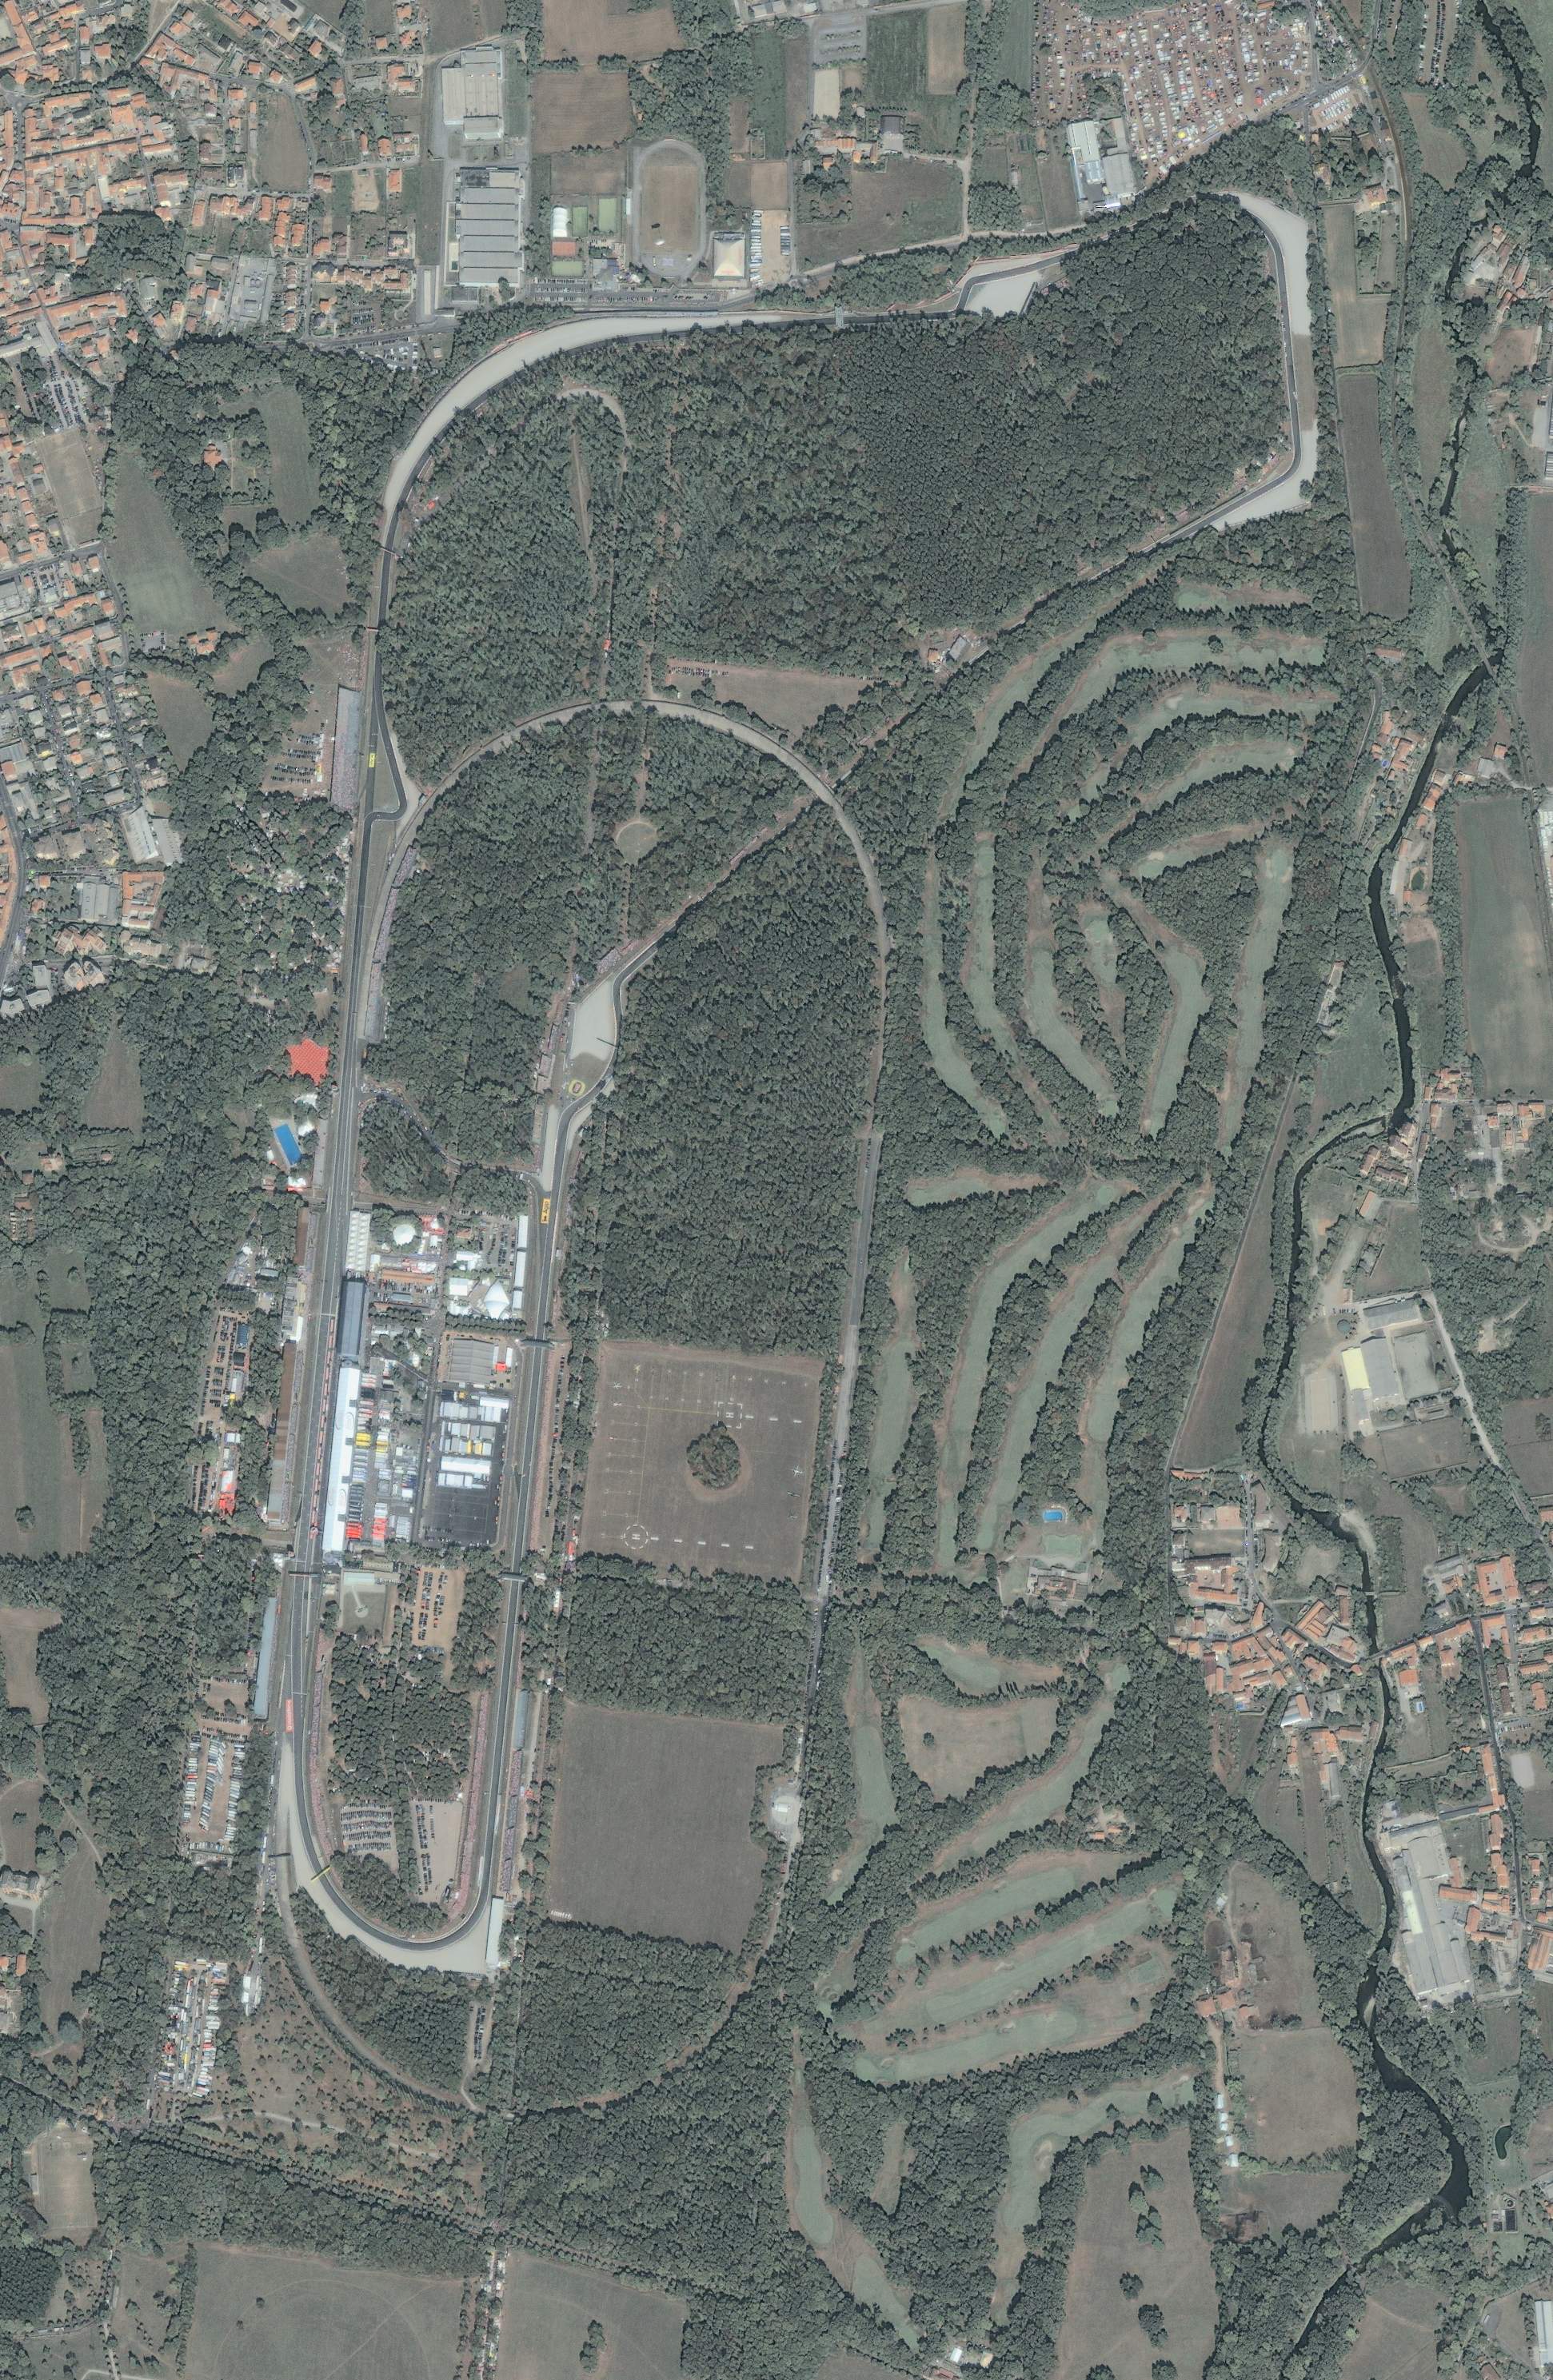 Monza from the air